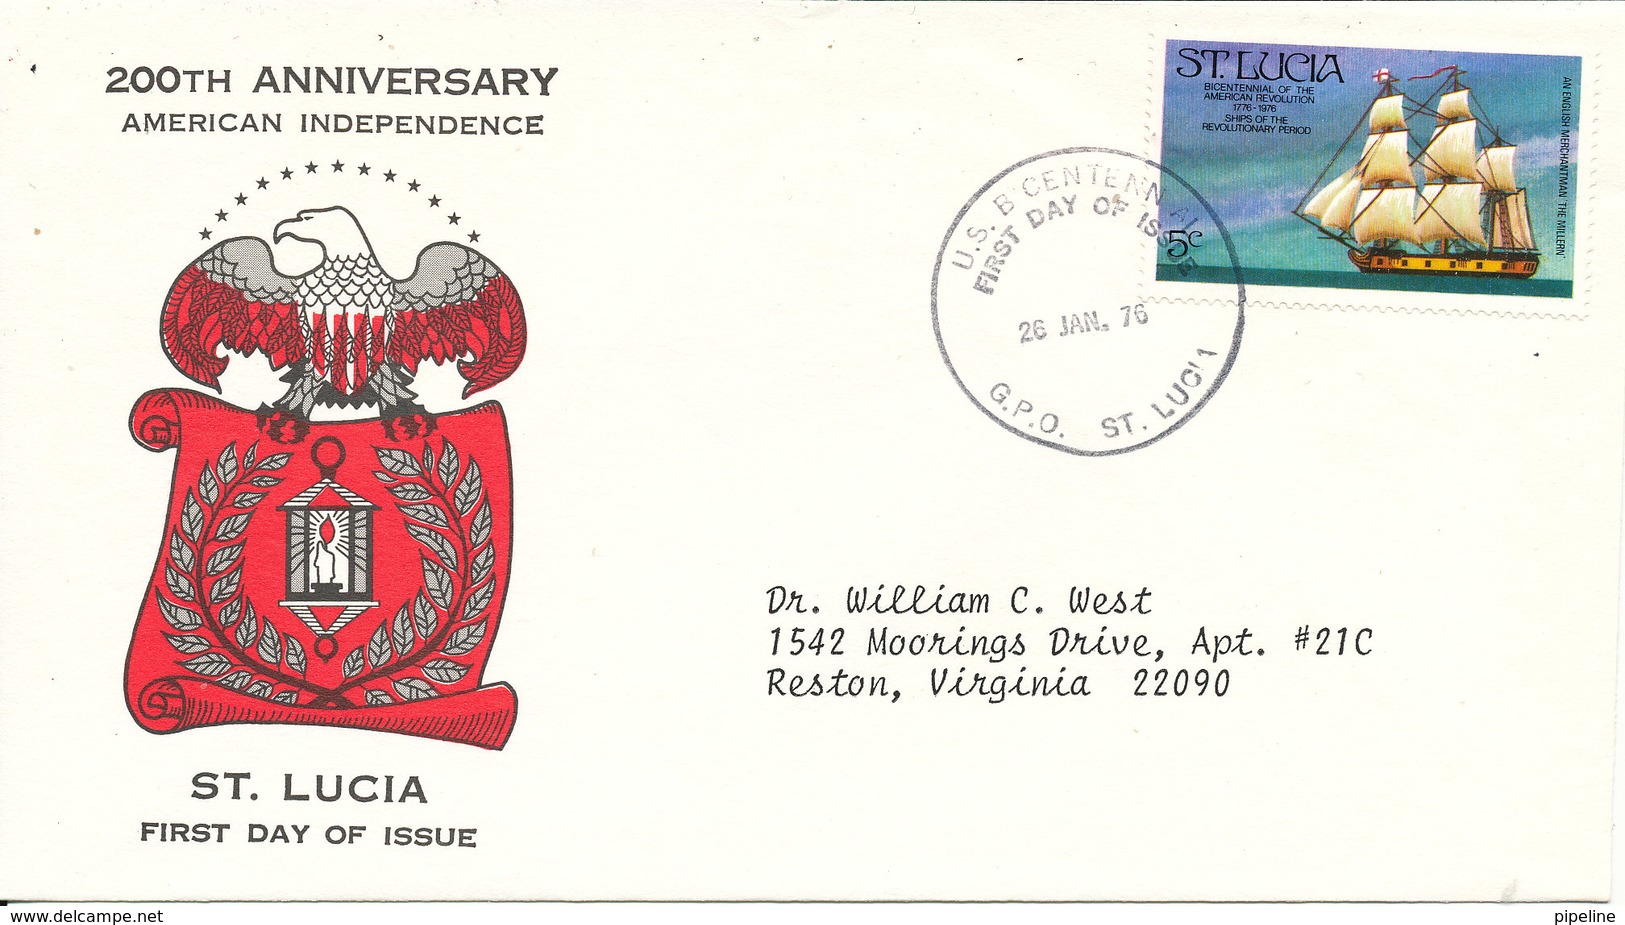 St. Lucia FDC 26-1-1976 U.S. Bi-Centennial 1776 - 1976 With Cachet - Us Independence